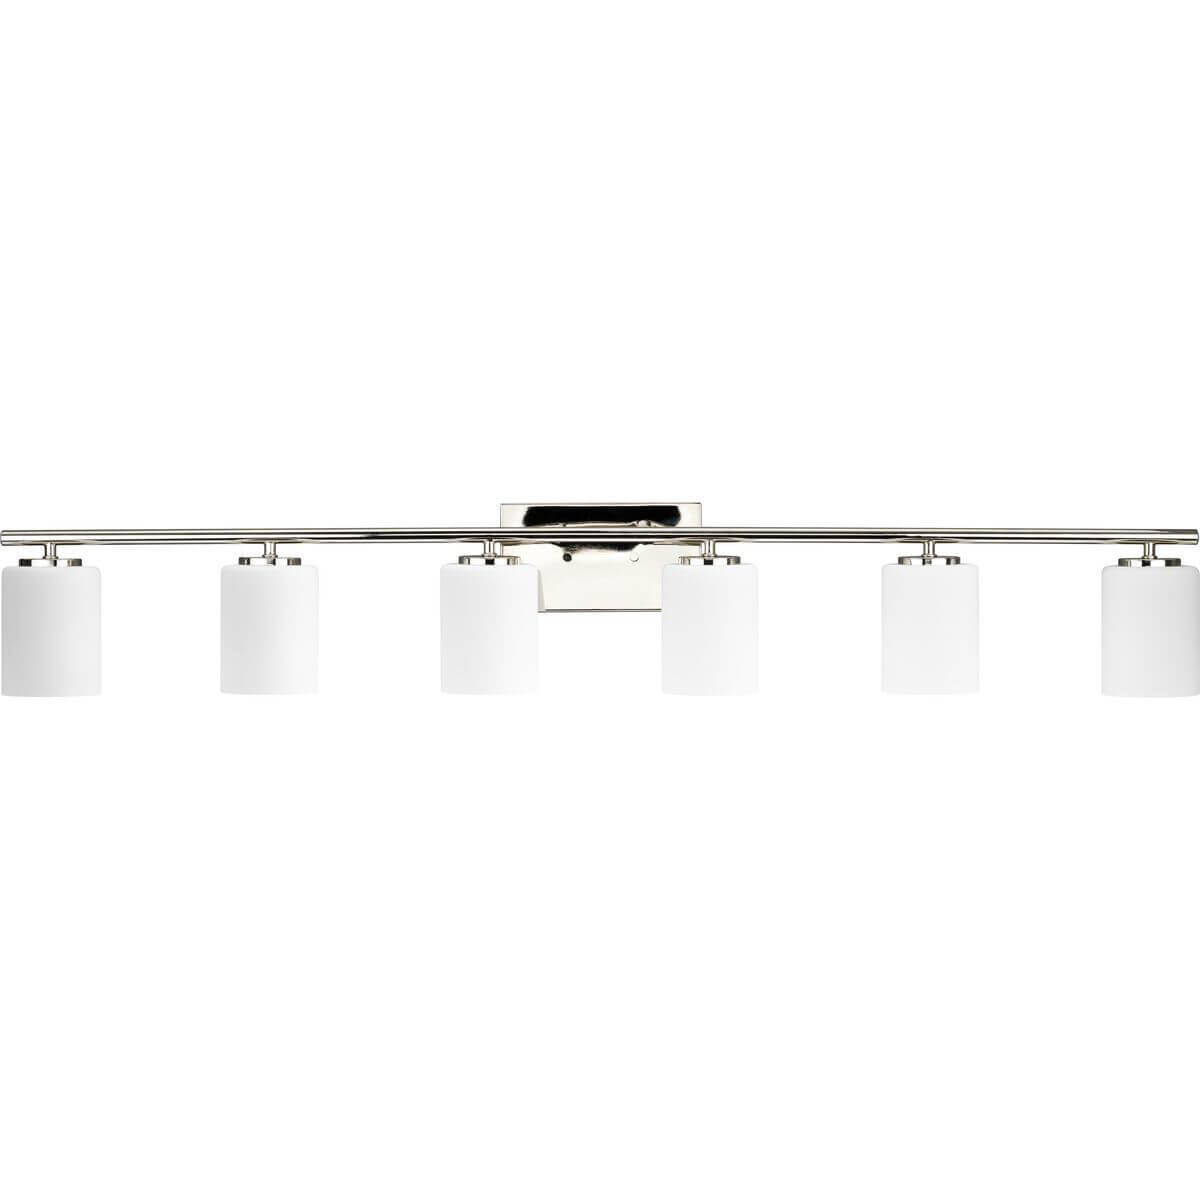 Progress Lighting Replay 6 Light 48 inch Bath Vanity Light in Polished Nickel with Etched White Glass P300385-104